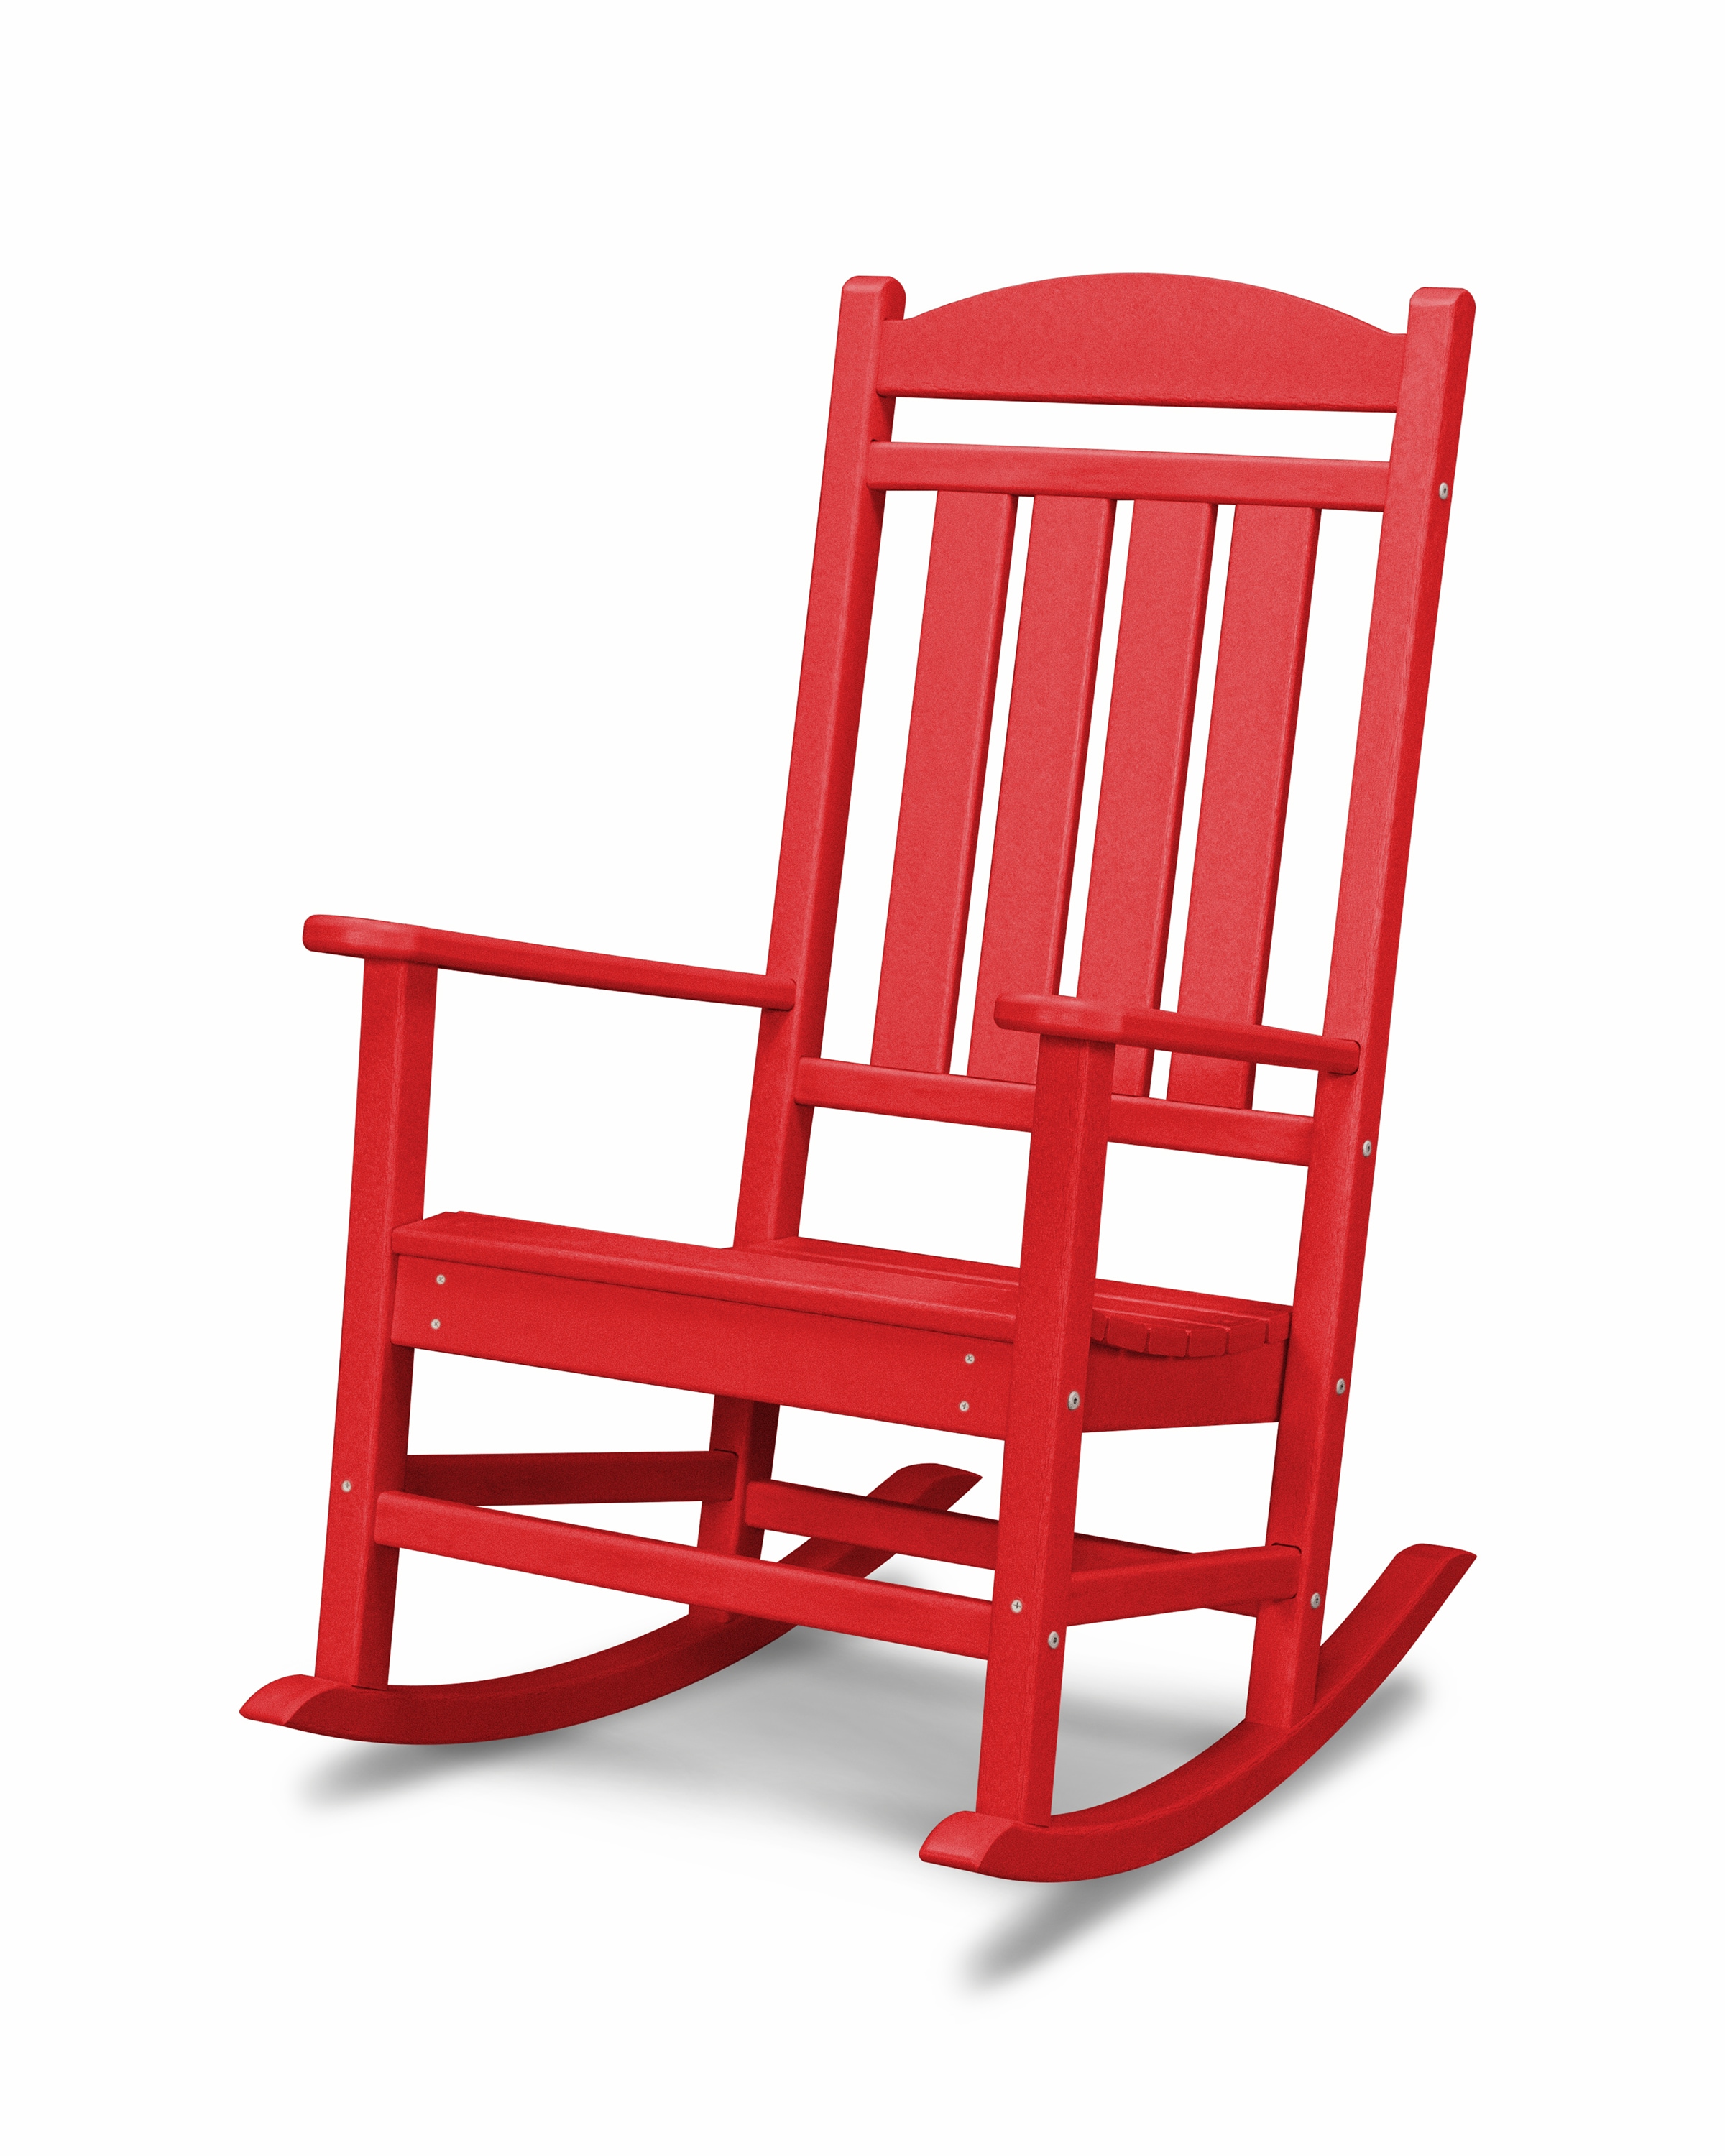 POLYWOOD Presidential Sunset Red Poly Lumber Frame Rocking Chair(s) With Slat Seat In The Patio Chairs Department At Lowes.com